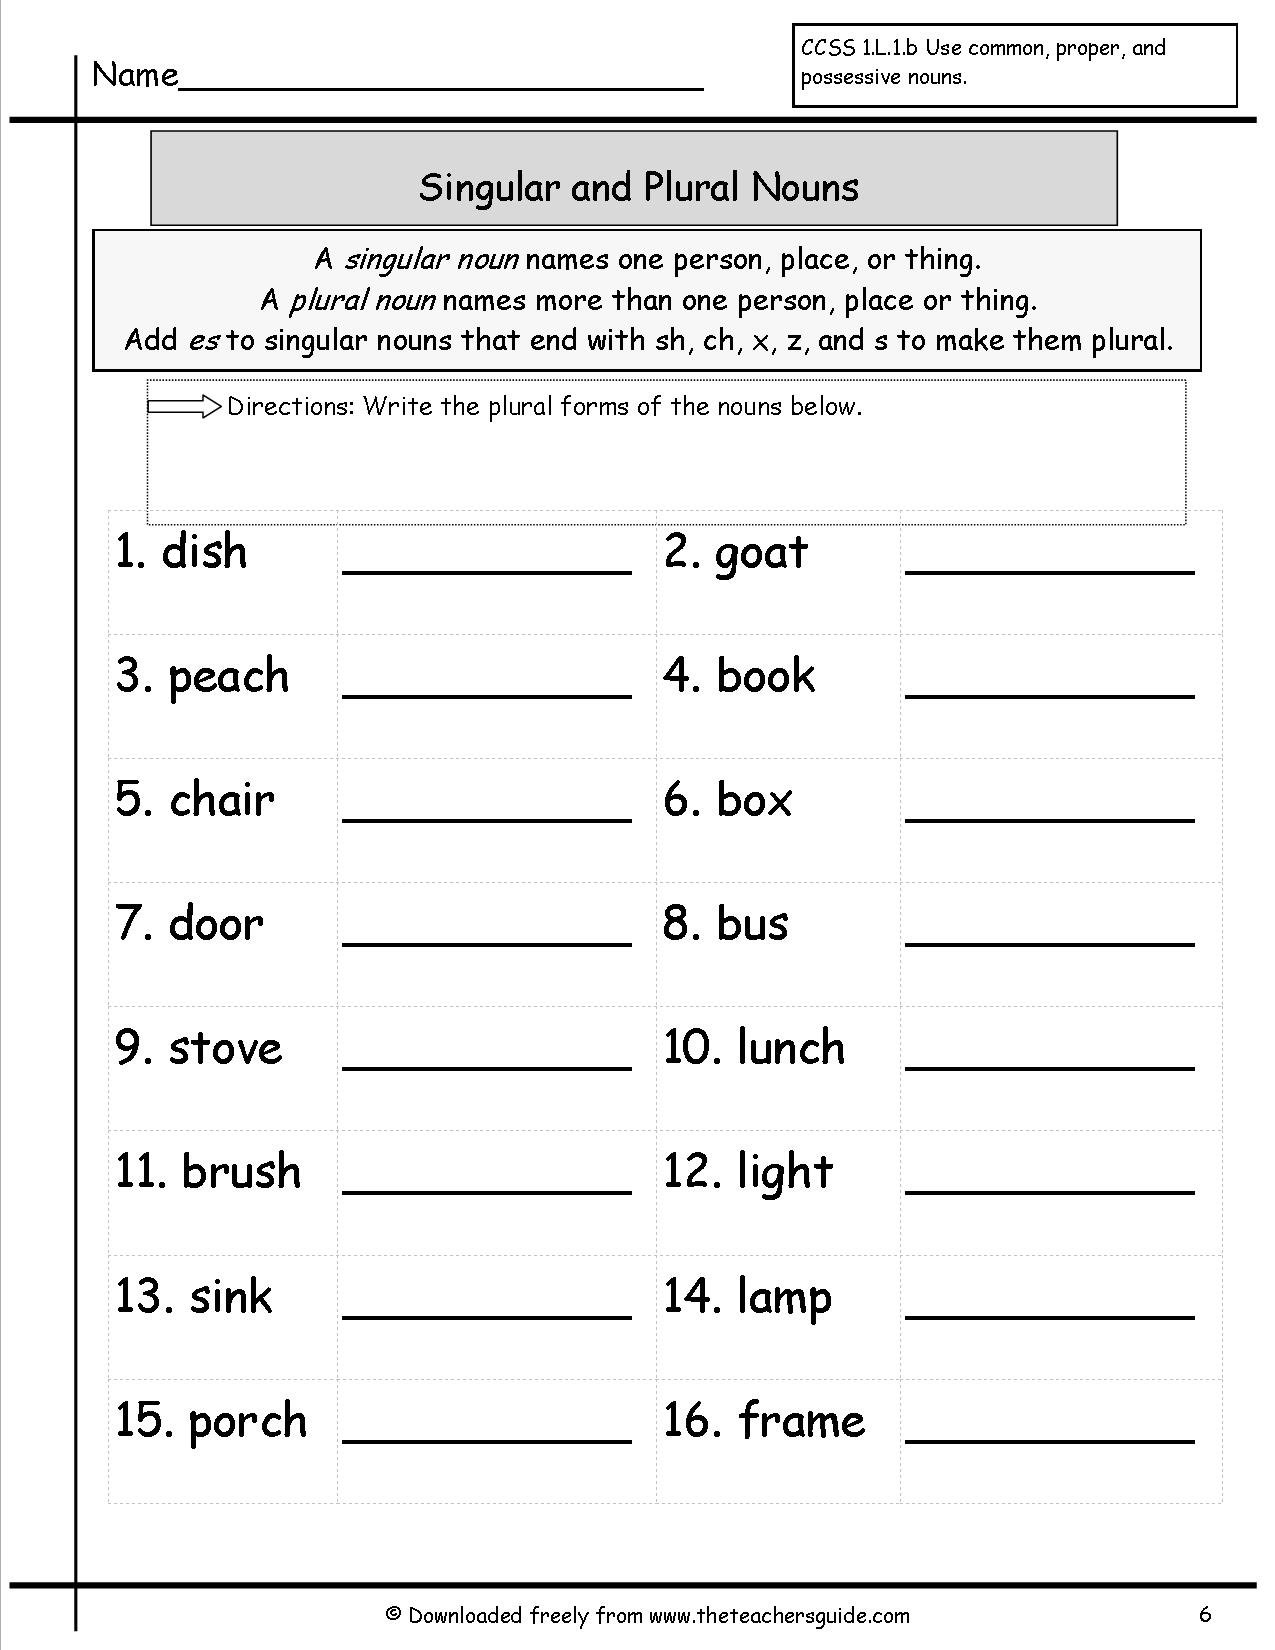 Plural Nouns Worksheets Pdf The Best Worksheets Image Collection